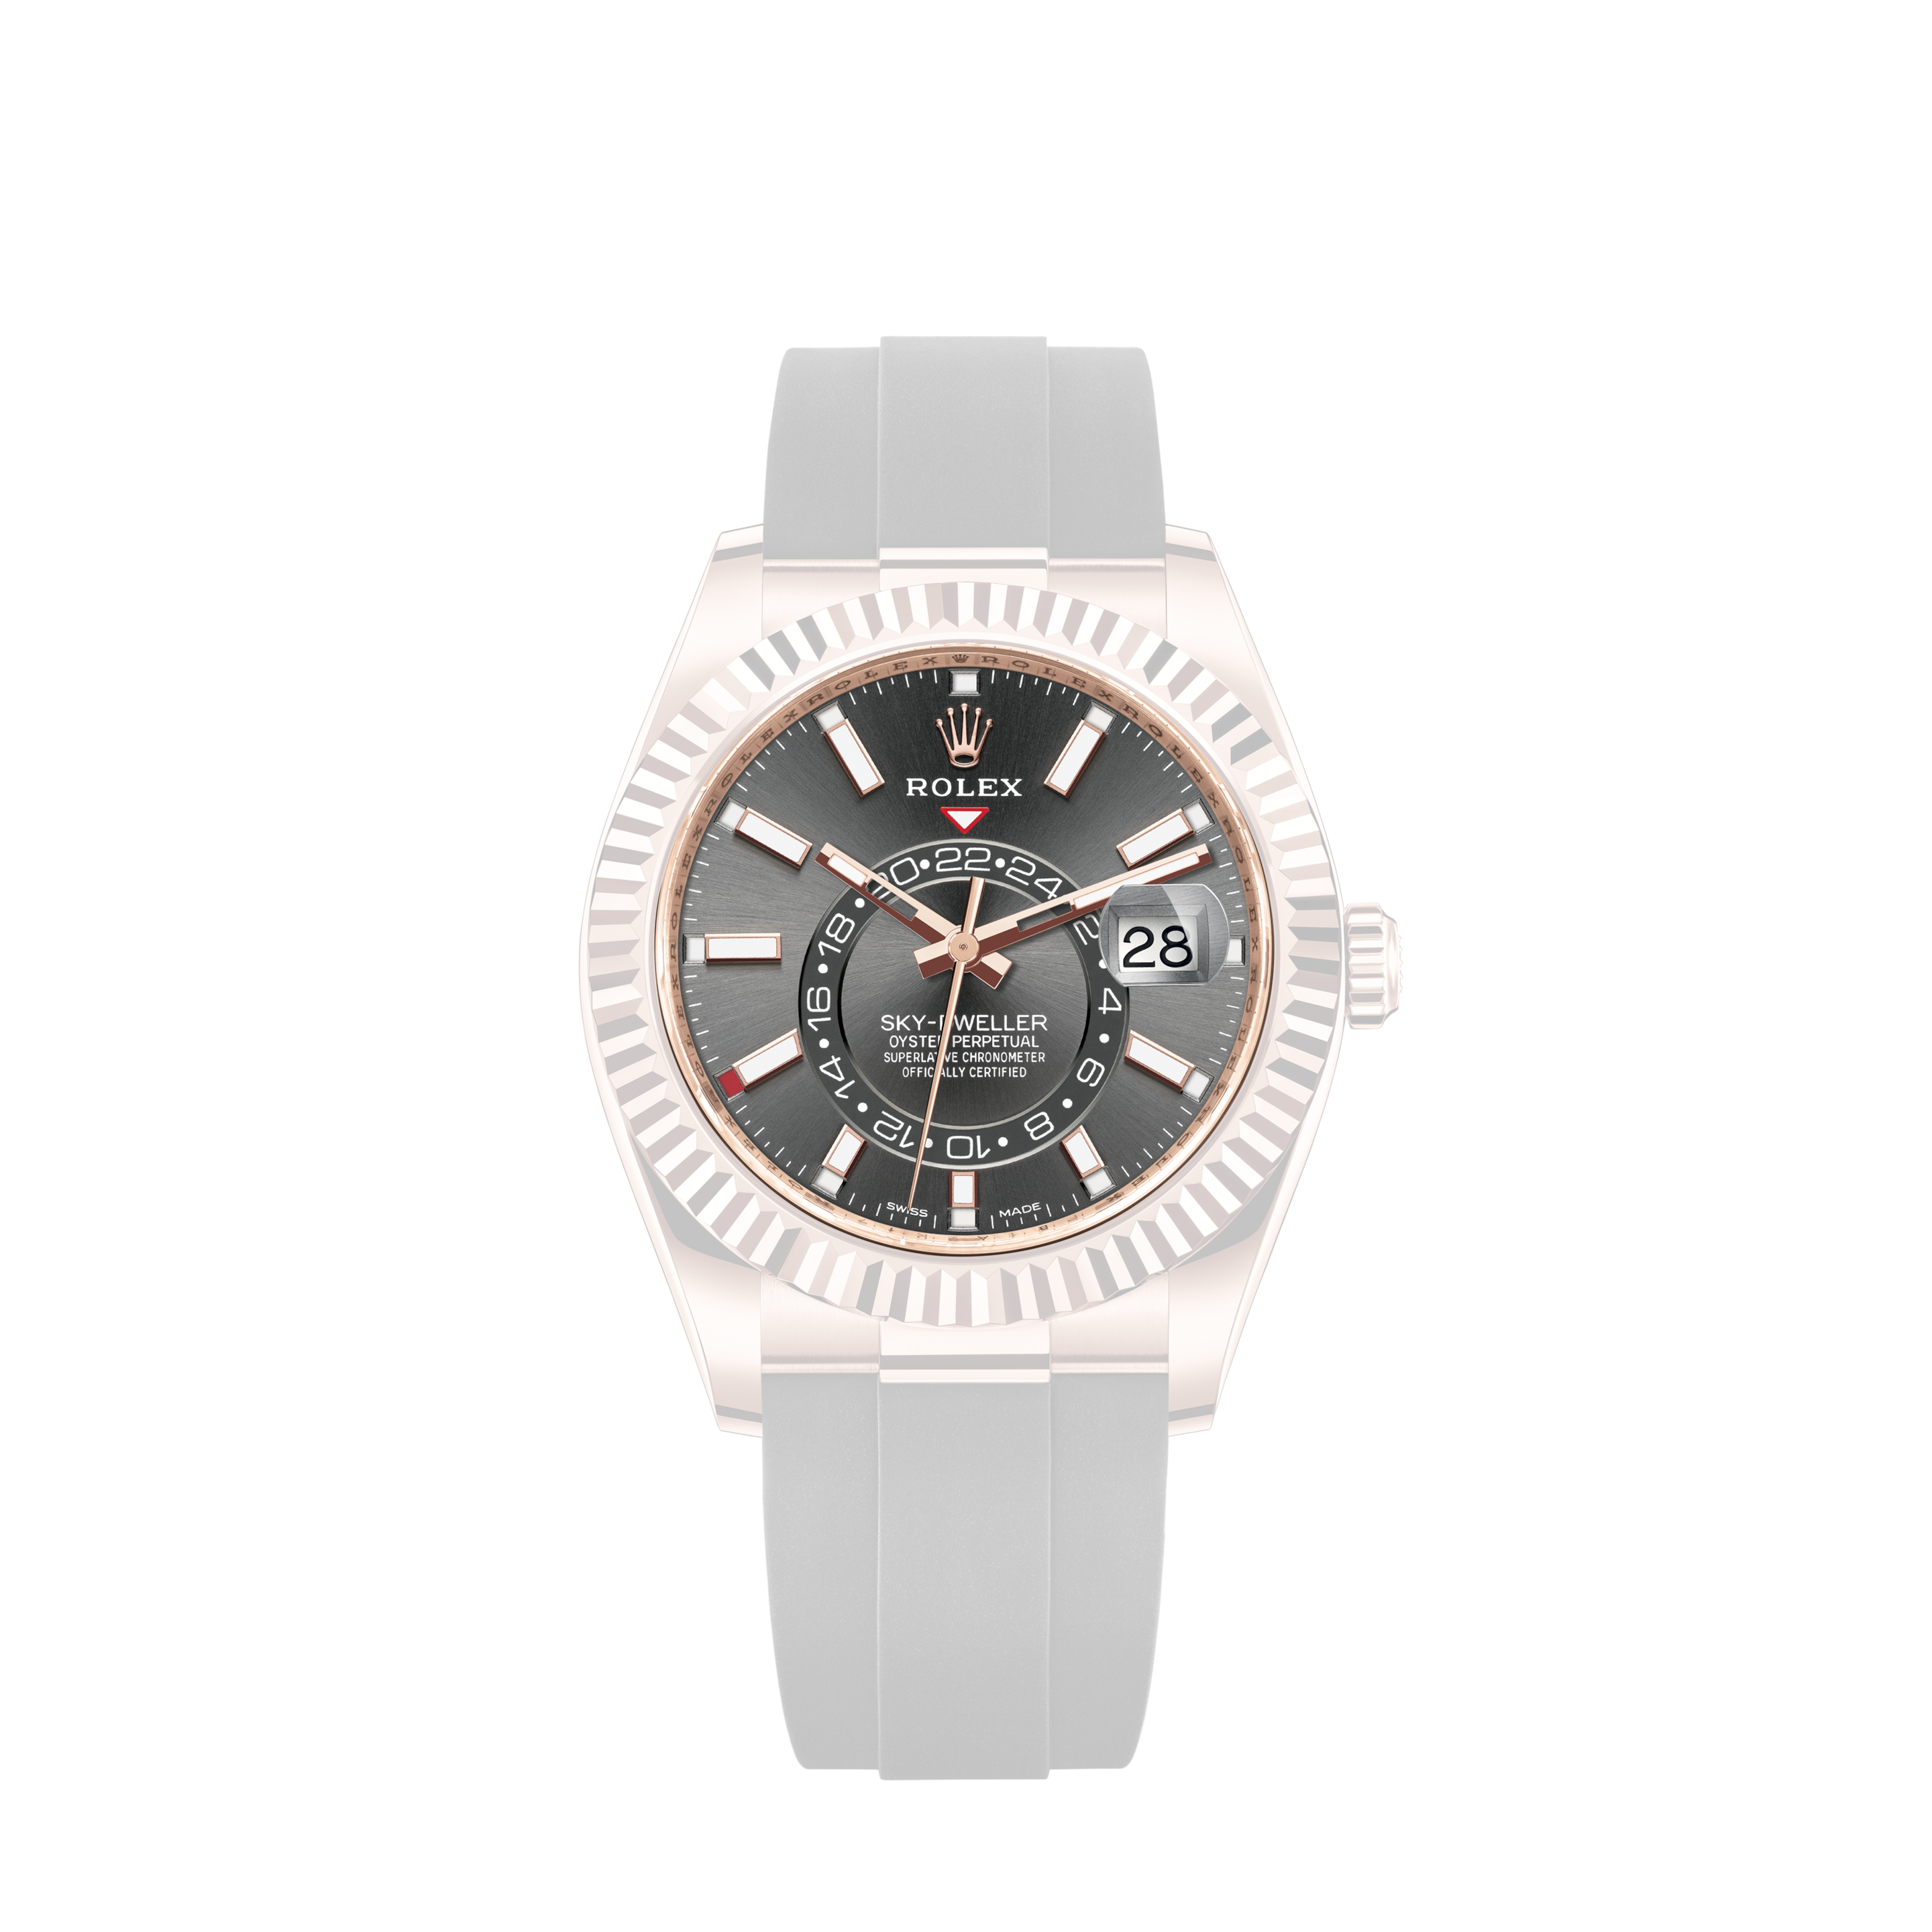 Rolex Datejust 36mm - Steel and Rose Gold - Domed Bezel - Oyster 126201 CHOJDO